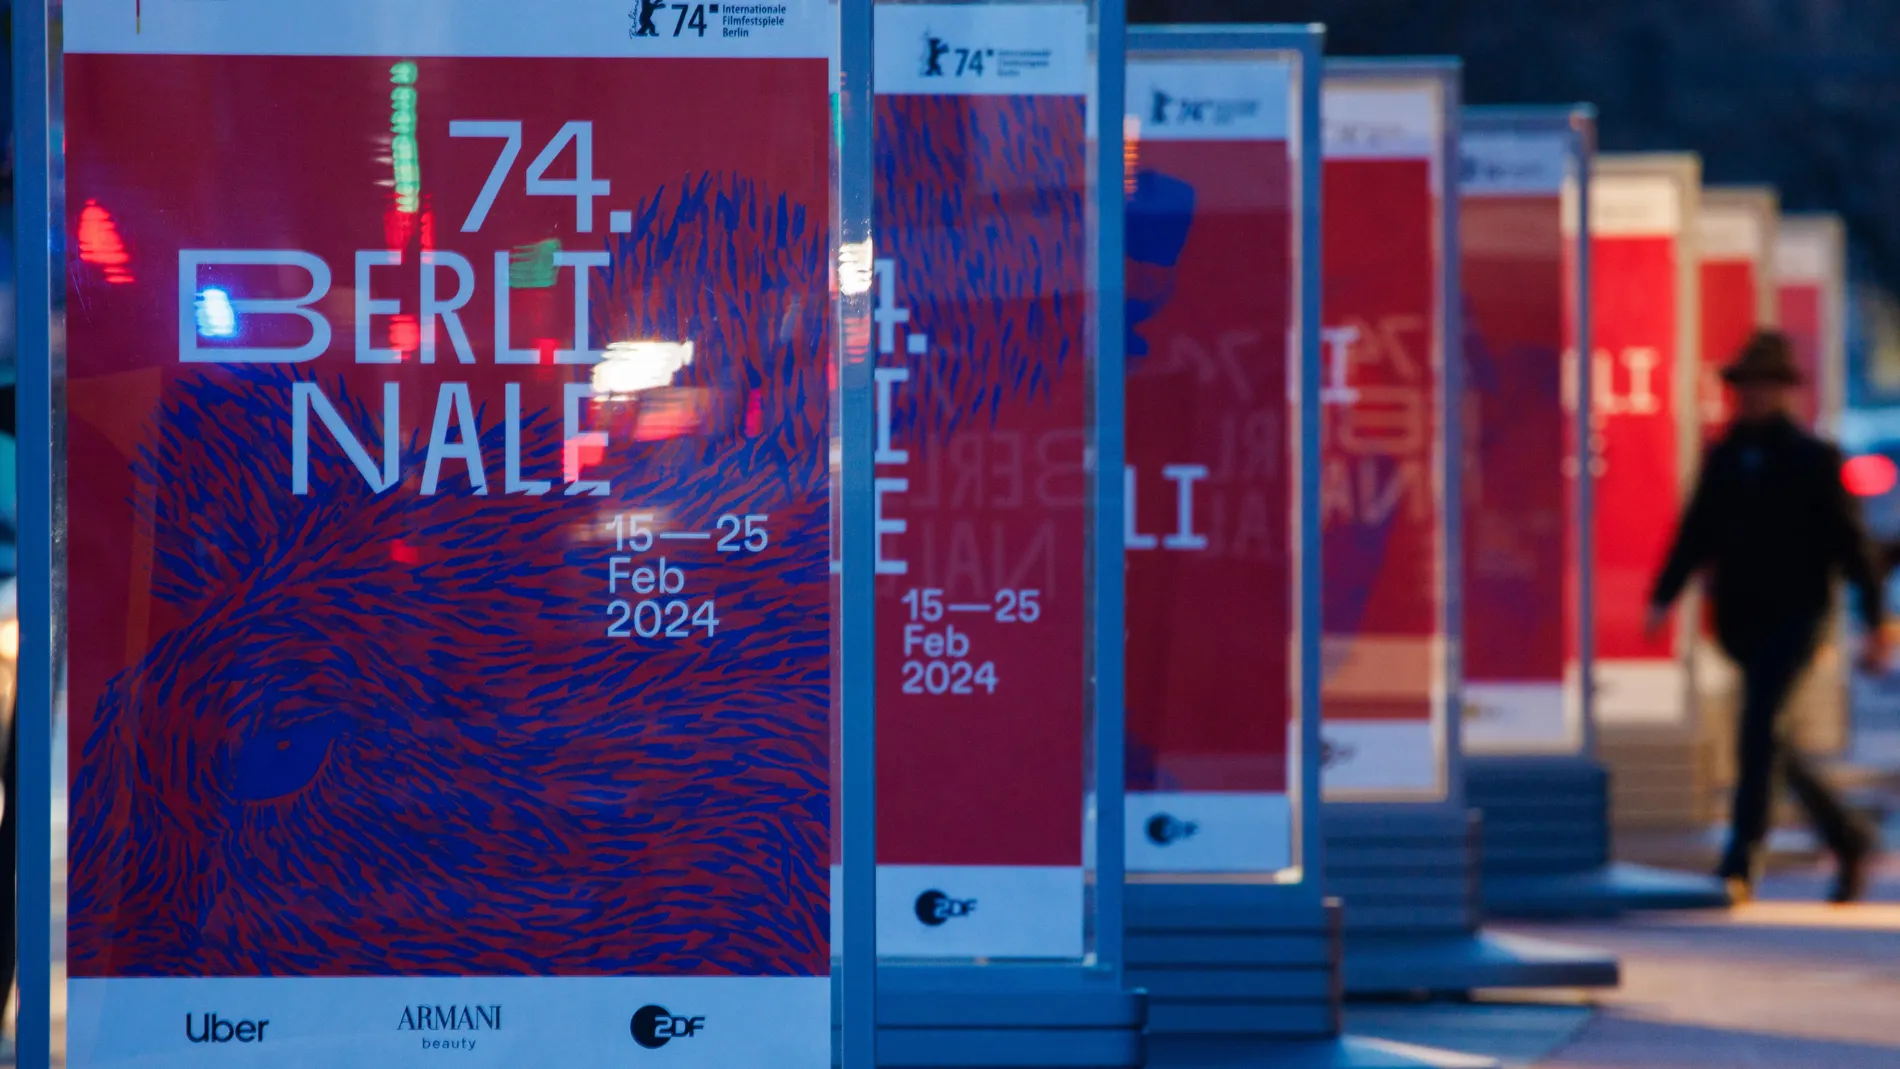 Berlin (Germany), 29/01/2024.- A passers-by walks near Berlinale posters at Potsdamer Platz square in Berlin, Germany, 29 January 2024. The 2024 edition of the upcoming Berlin International Film Festival 'Berlinale' will run from 15 to 25 February. (Cine, Alemania) EFE/EPA/CLEMENS BILAN 